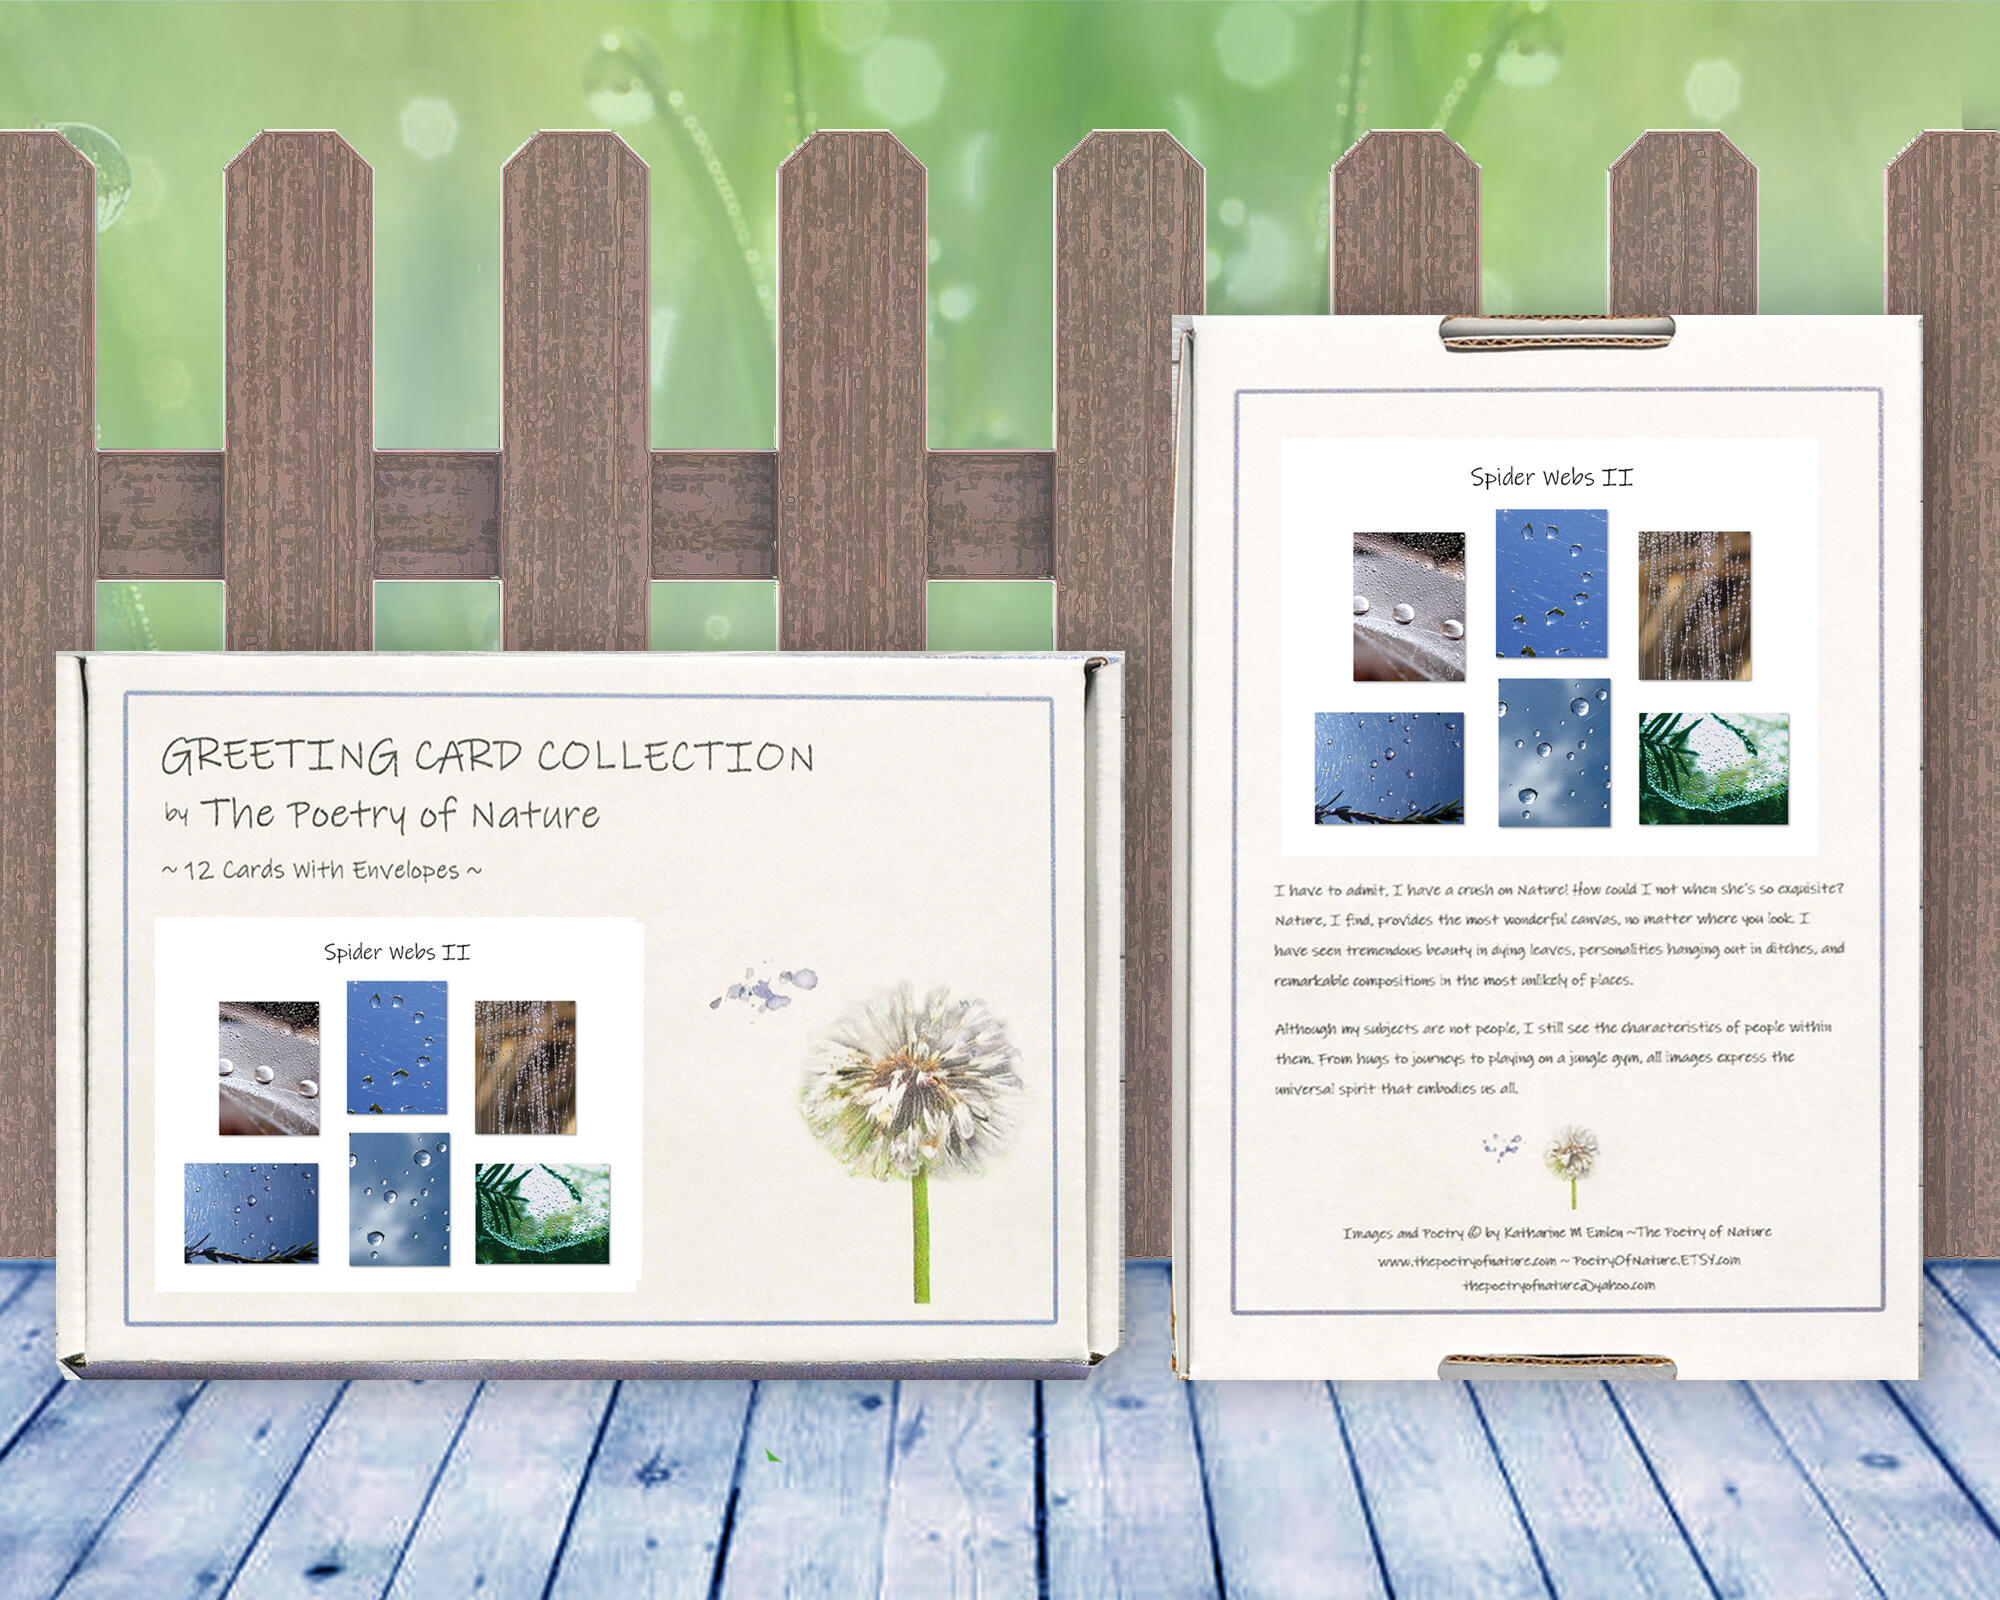 Spider WebsII - Greeting Card Collection by The Poetry of Nature